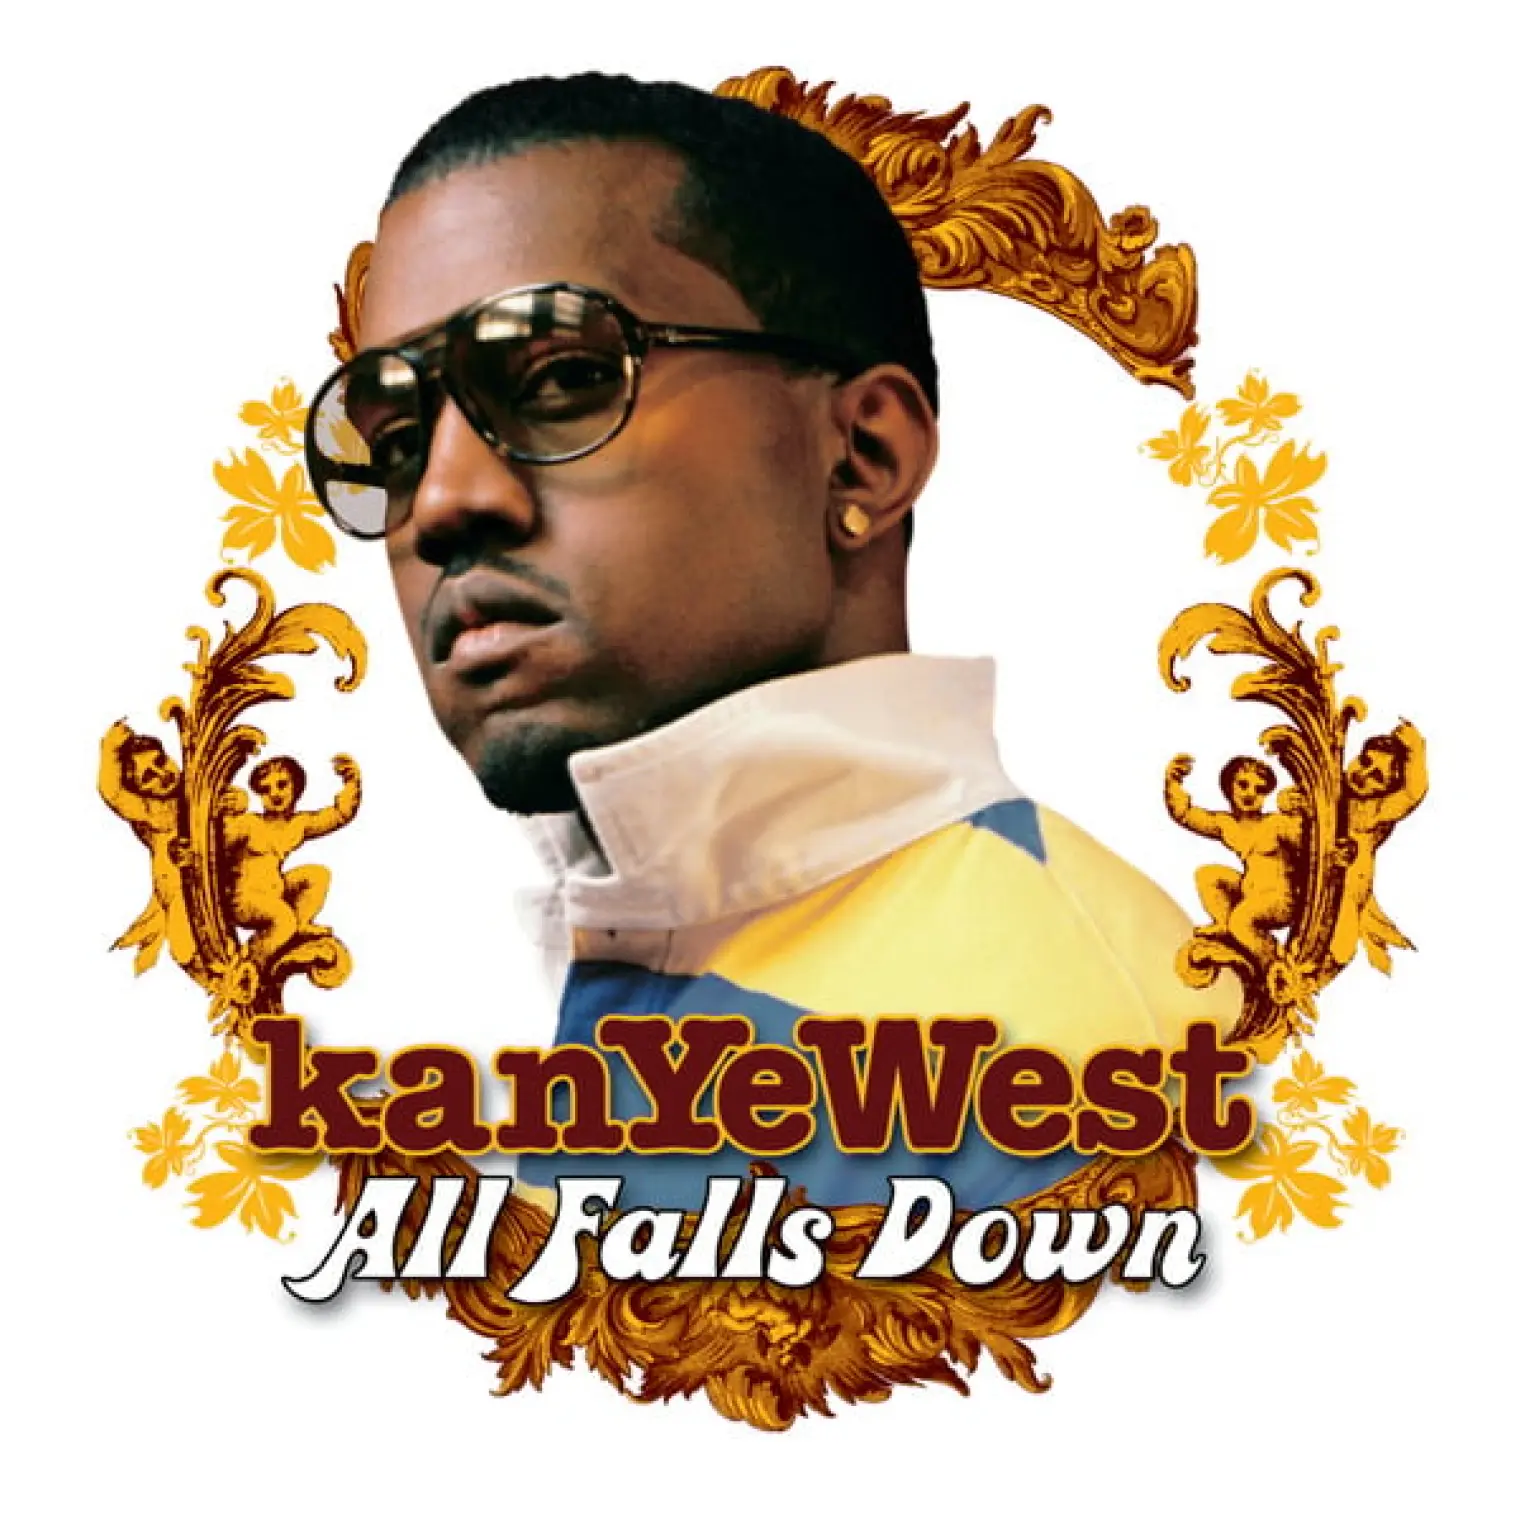 All Falls Down -  Kanye West 